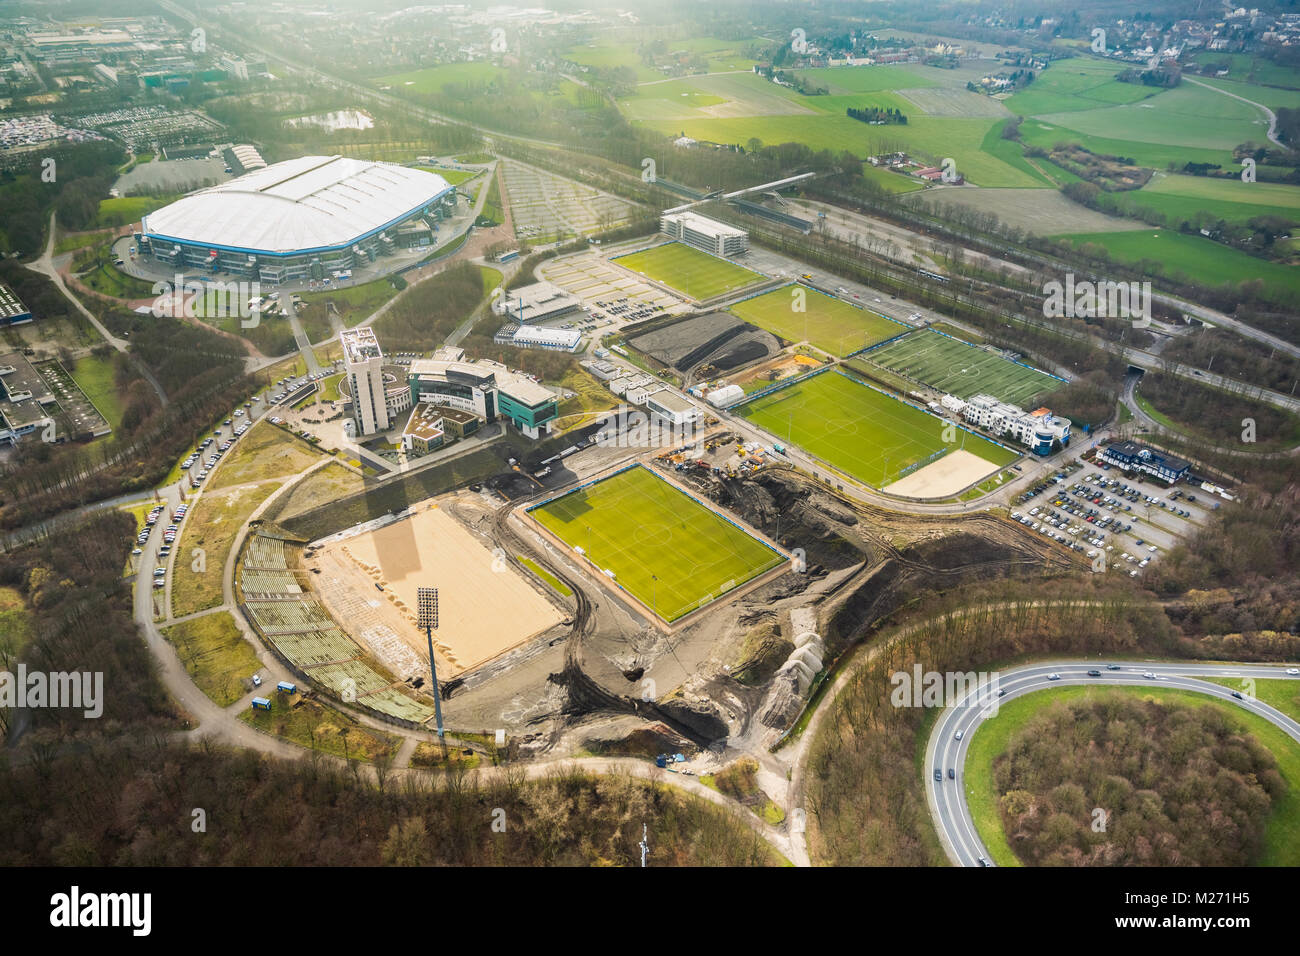 Construction project Bergerfeld to restructure and expand the club facilities of FC Schalke 04 on the site of the former Park stadium in Gelsenkirchen Stock Photo